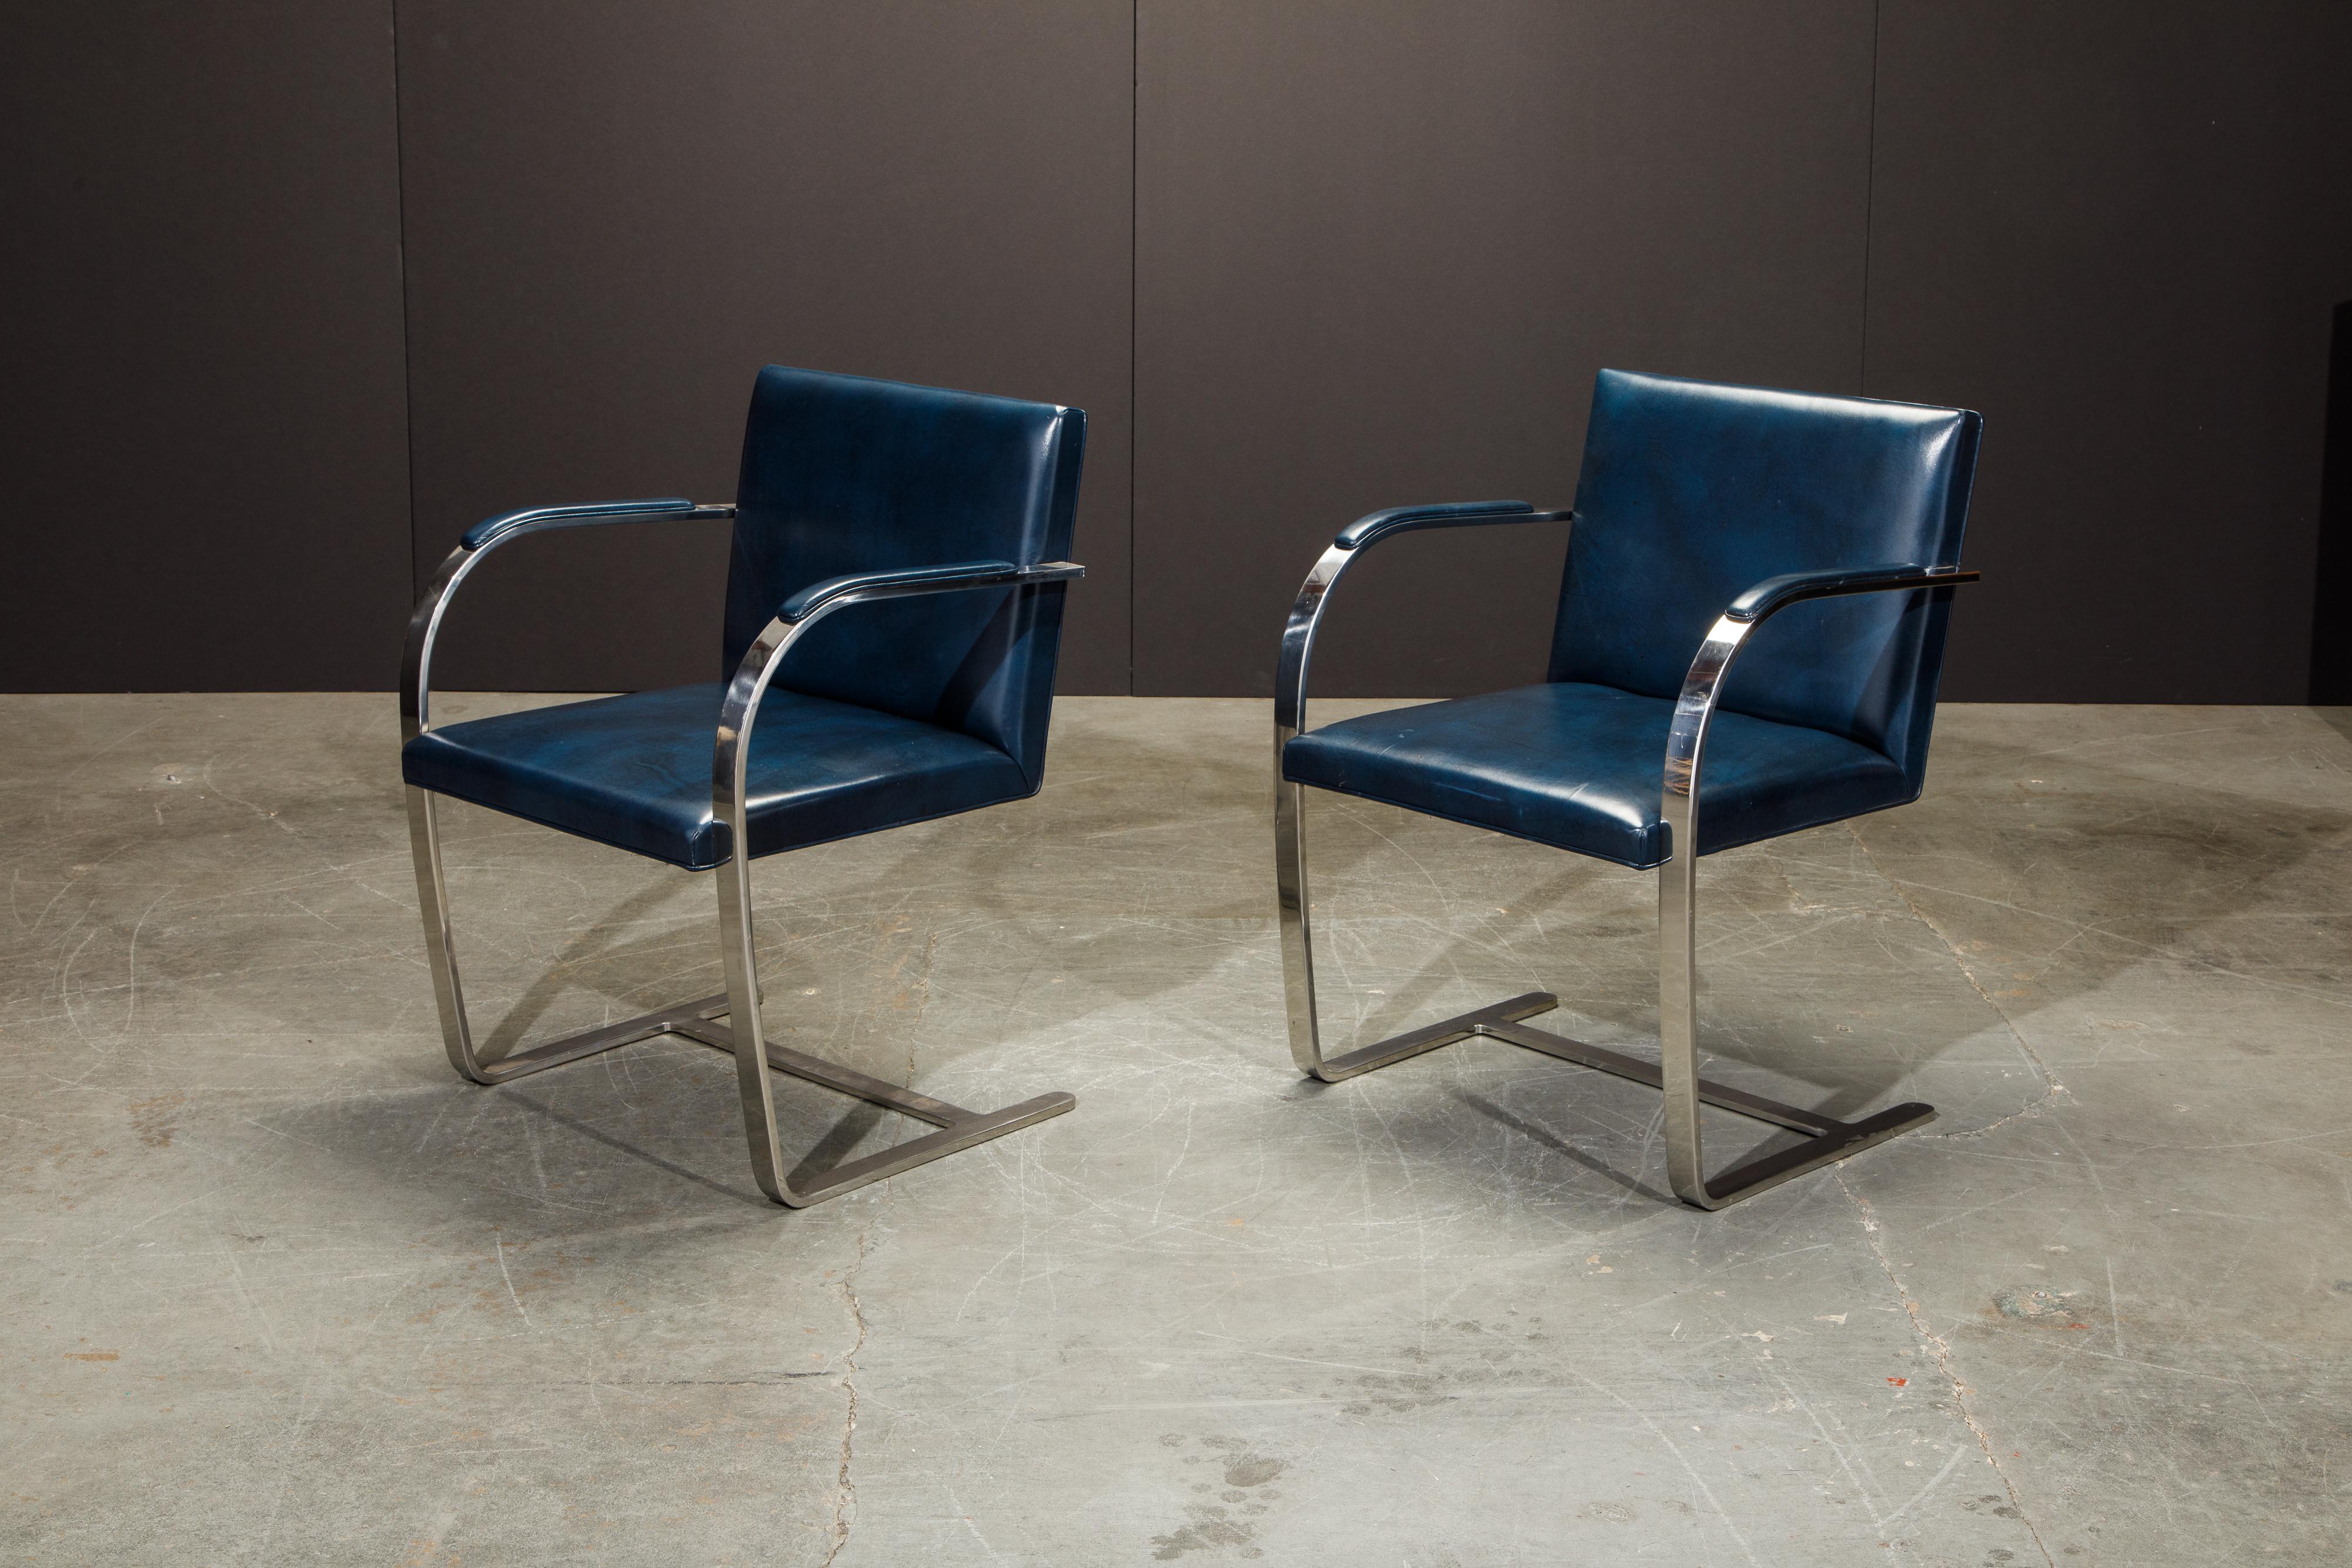 Stainless Steel Knoll International Blue 'Brno' Armchairs by Mies van der Rohe, 1970s Signed